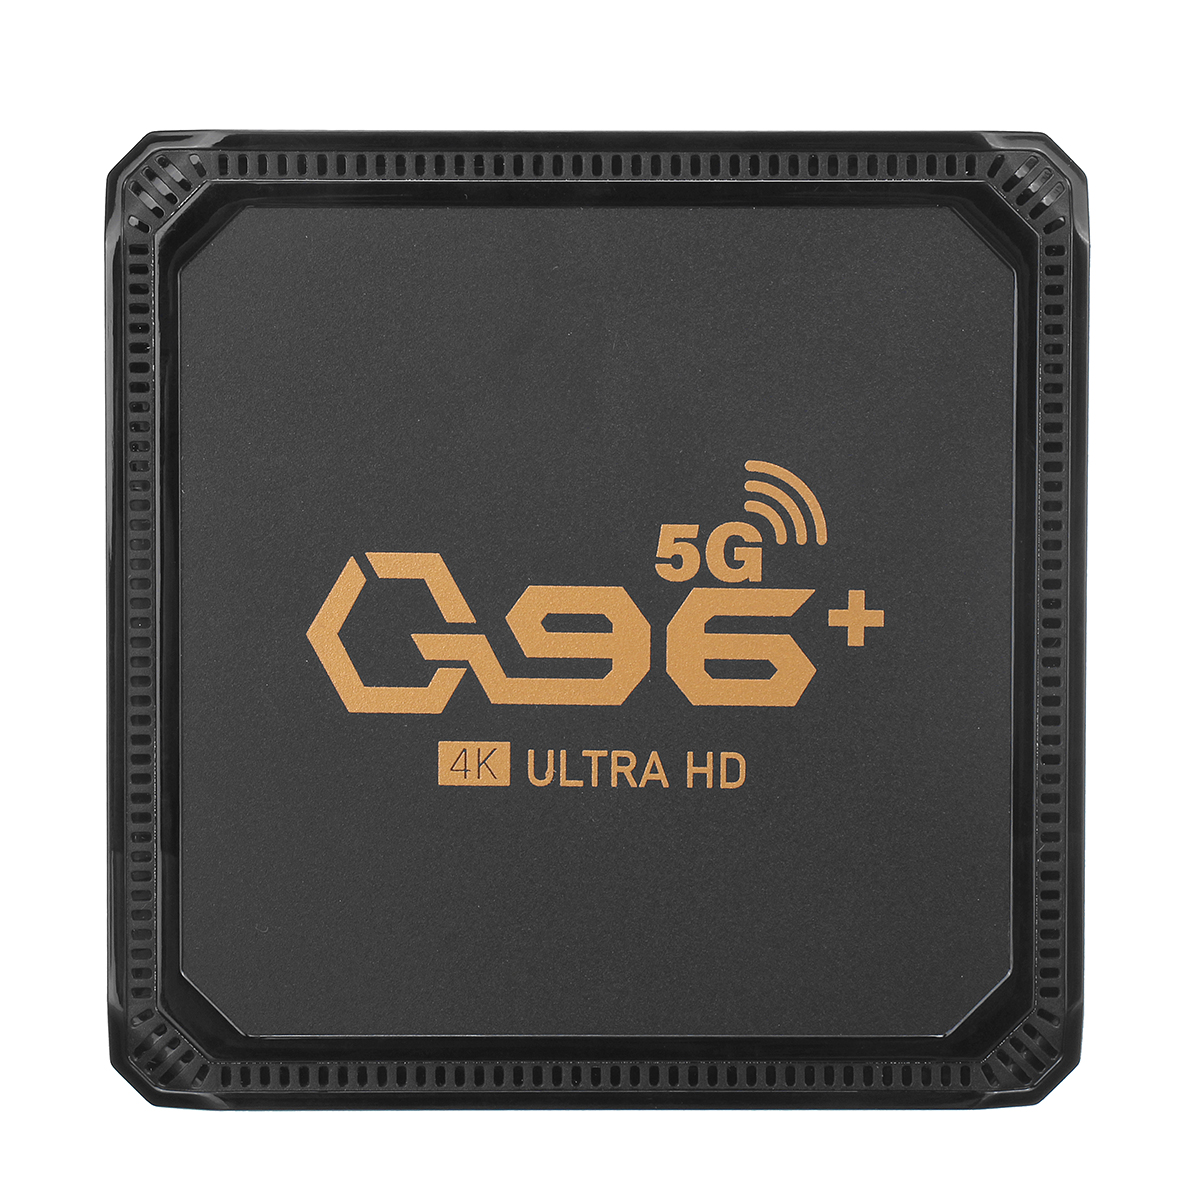 Find Q96+ Hisilicon Hi3798M Quad-core 4GB RAM 64GB ROM 2.4G 5G WIFI Android 10.0 Smart TV Box 4K H.265 VP9 Video Decoder OTT Box for Sale on Gipsybee.com with cryptocurrencies